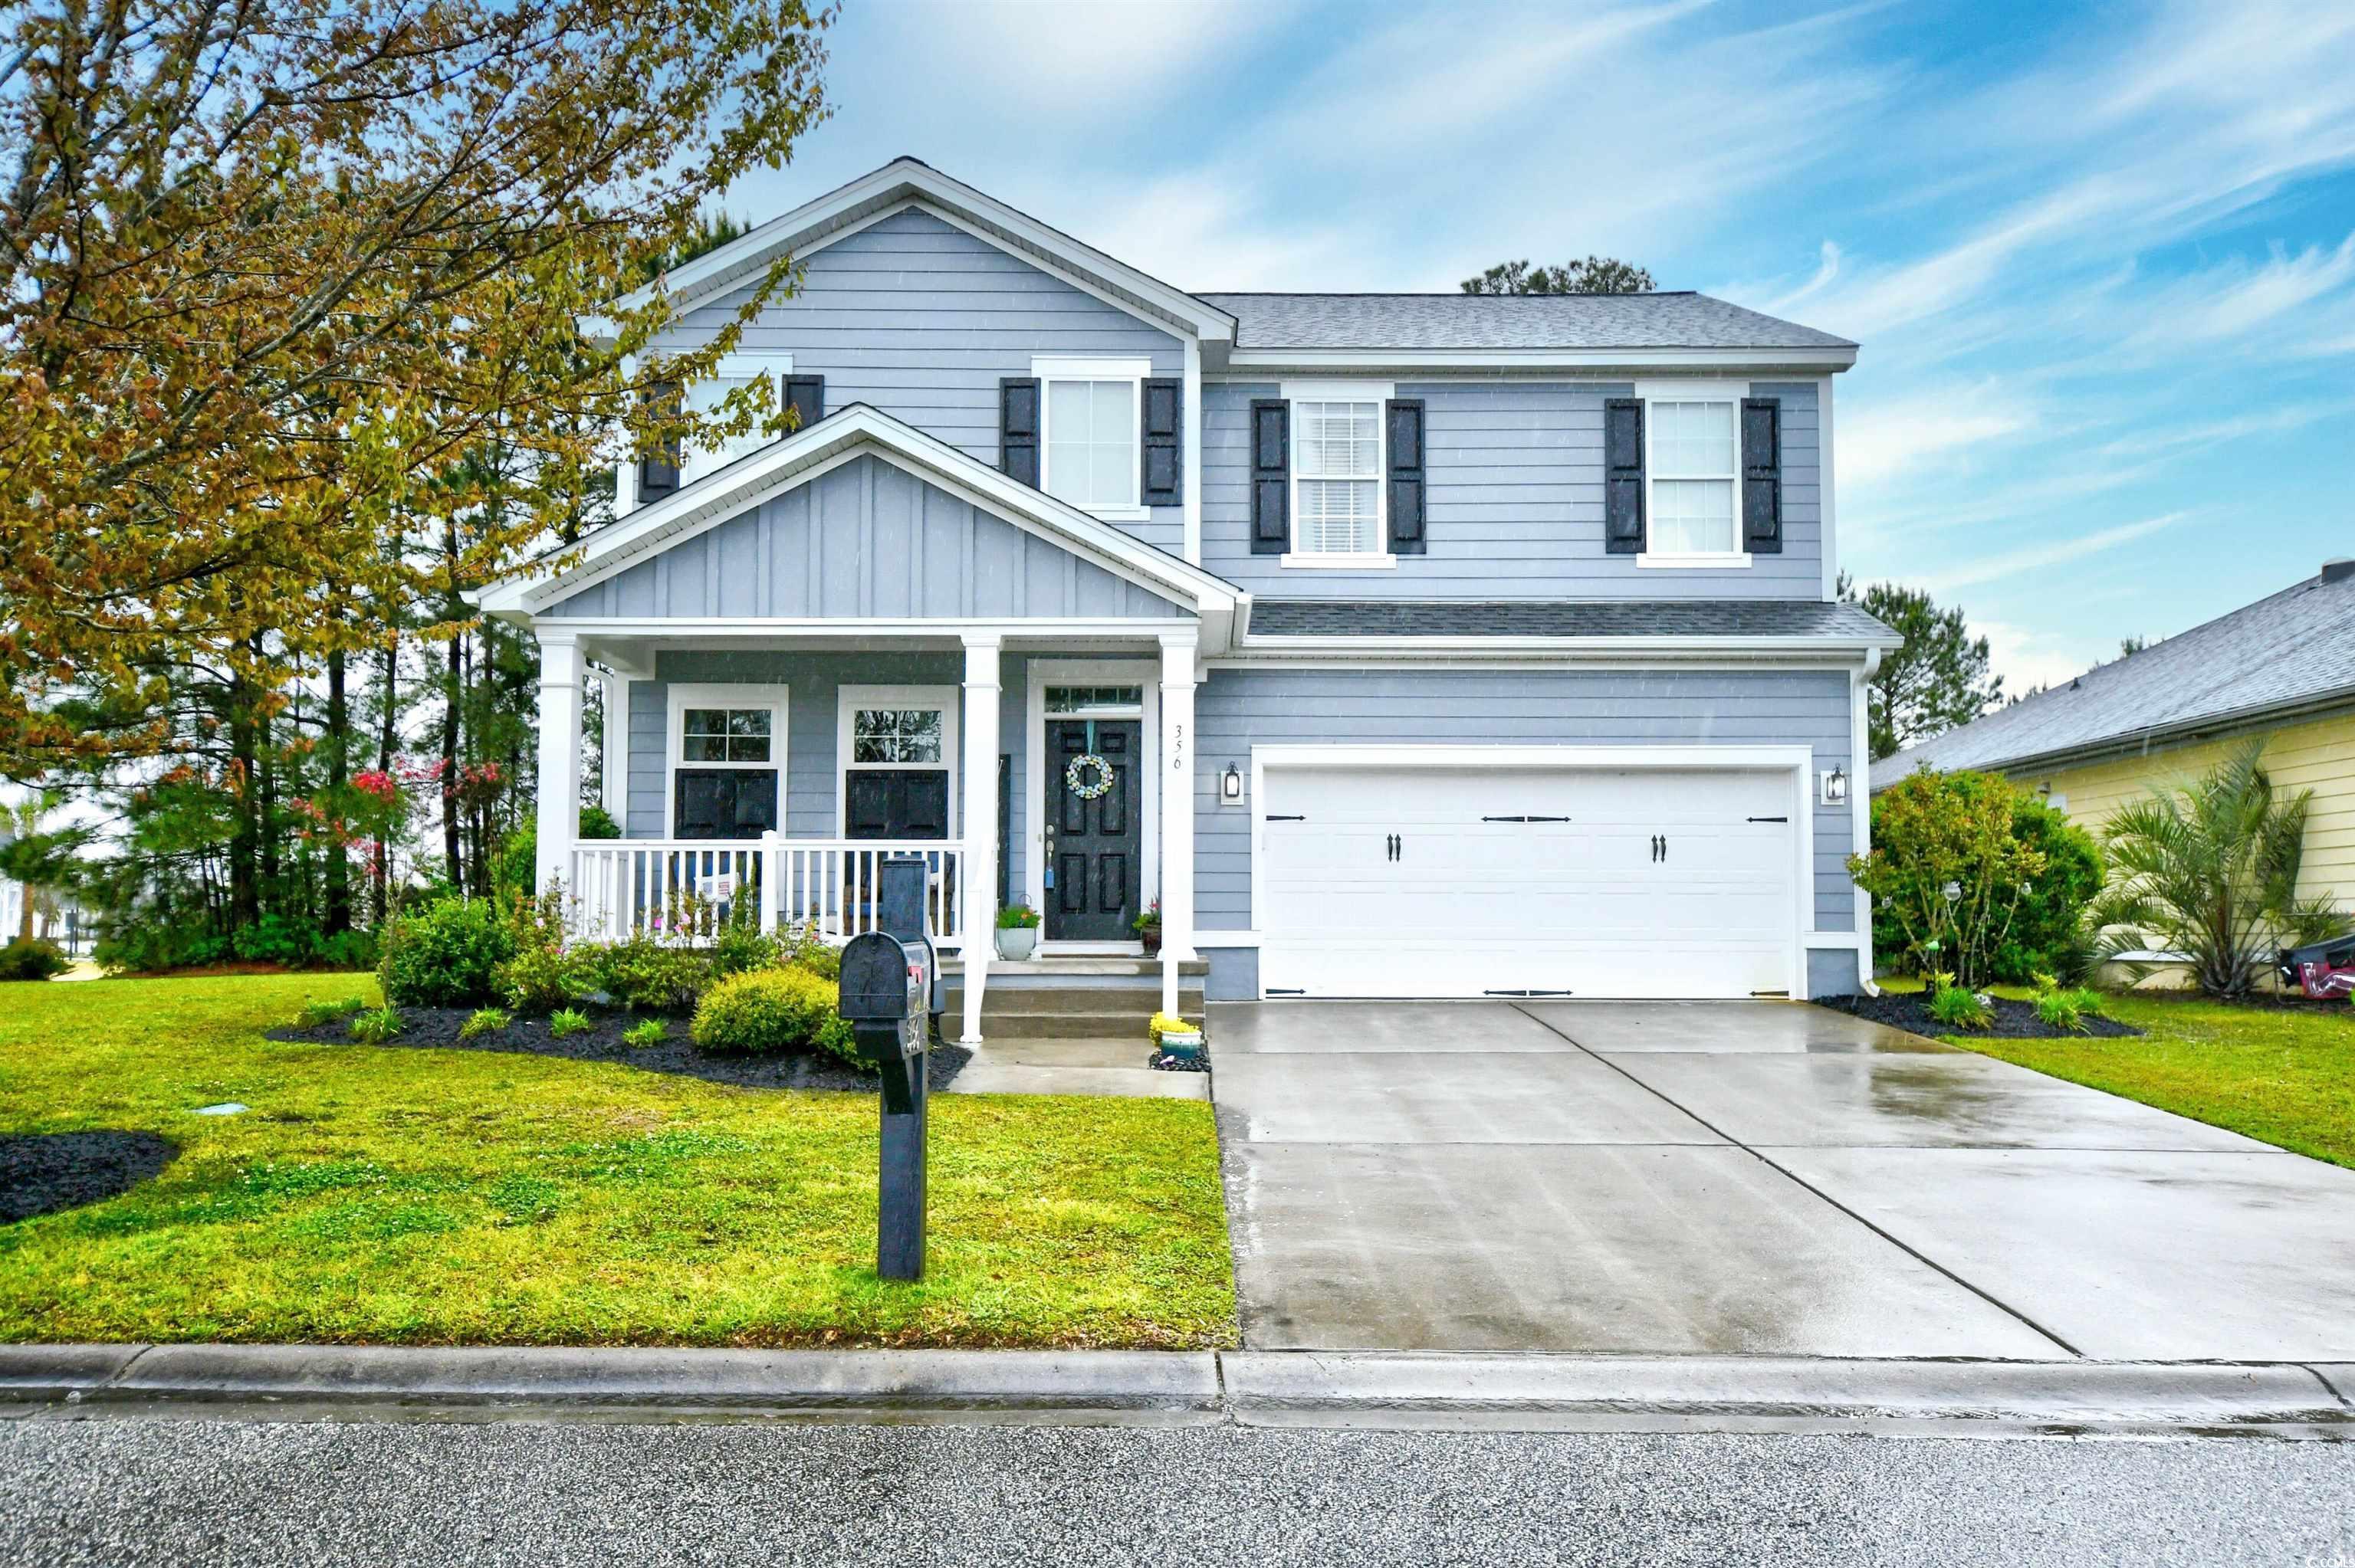 Photo one of 356 Simplicity Dr. Murrells Inlet SC 29576 | MLS 2407729